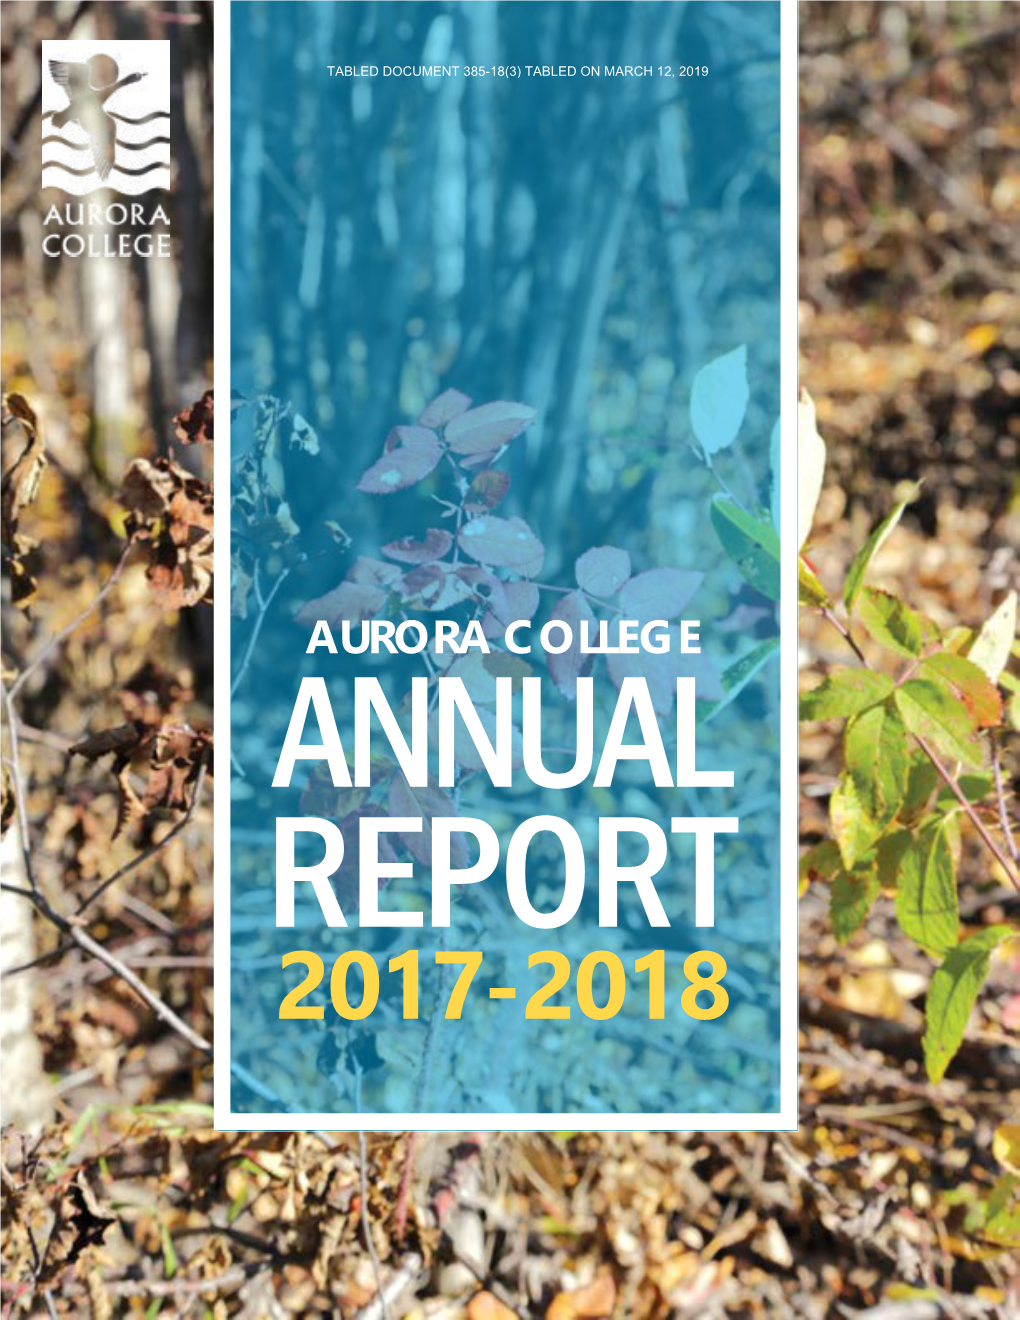 AURORA COLLEGE ANNUAL REPORT 2017-2018 Table of Contents